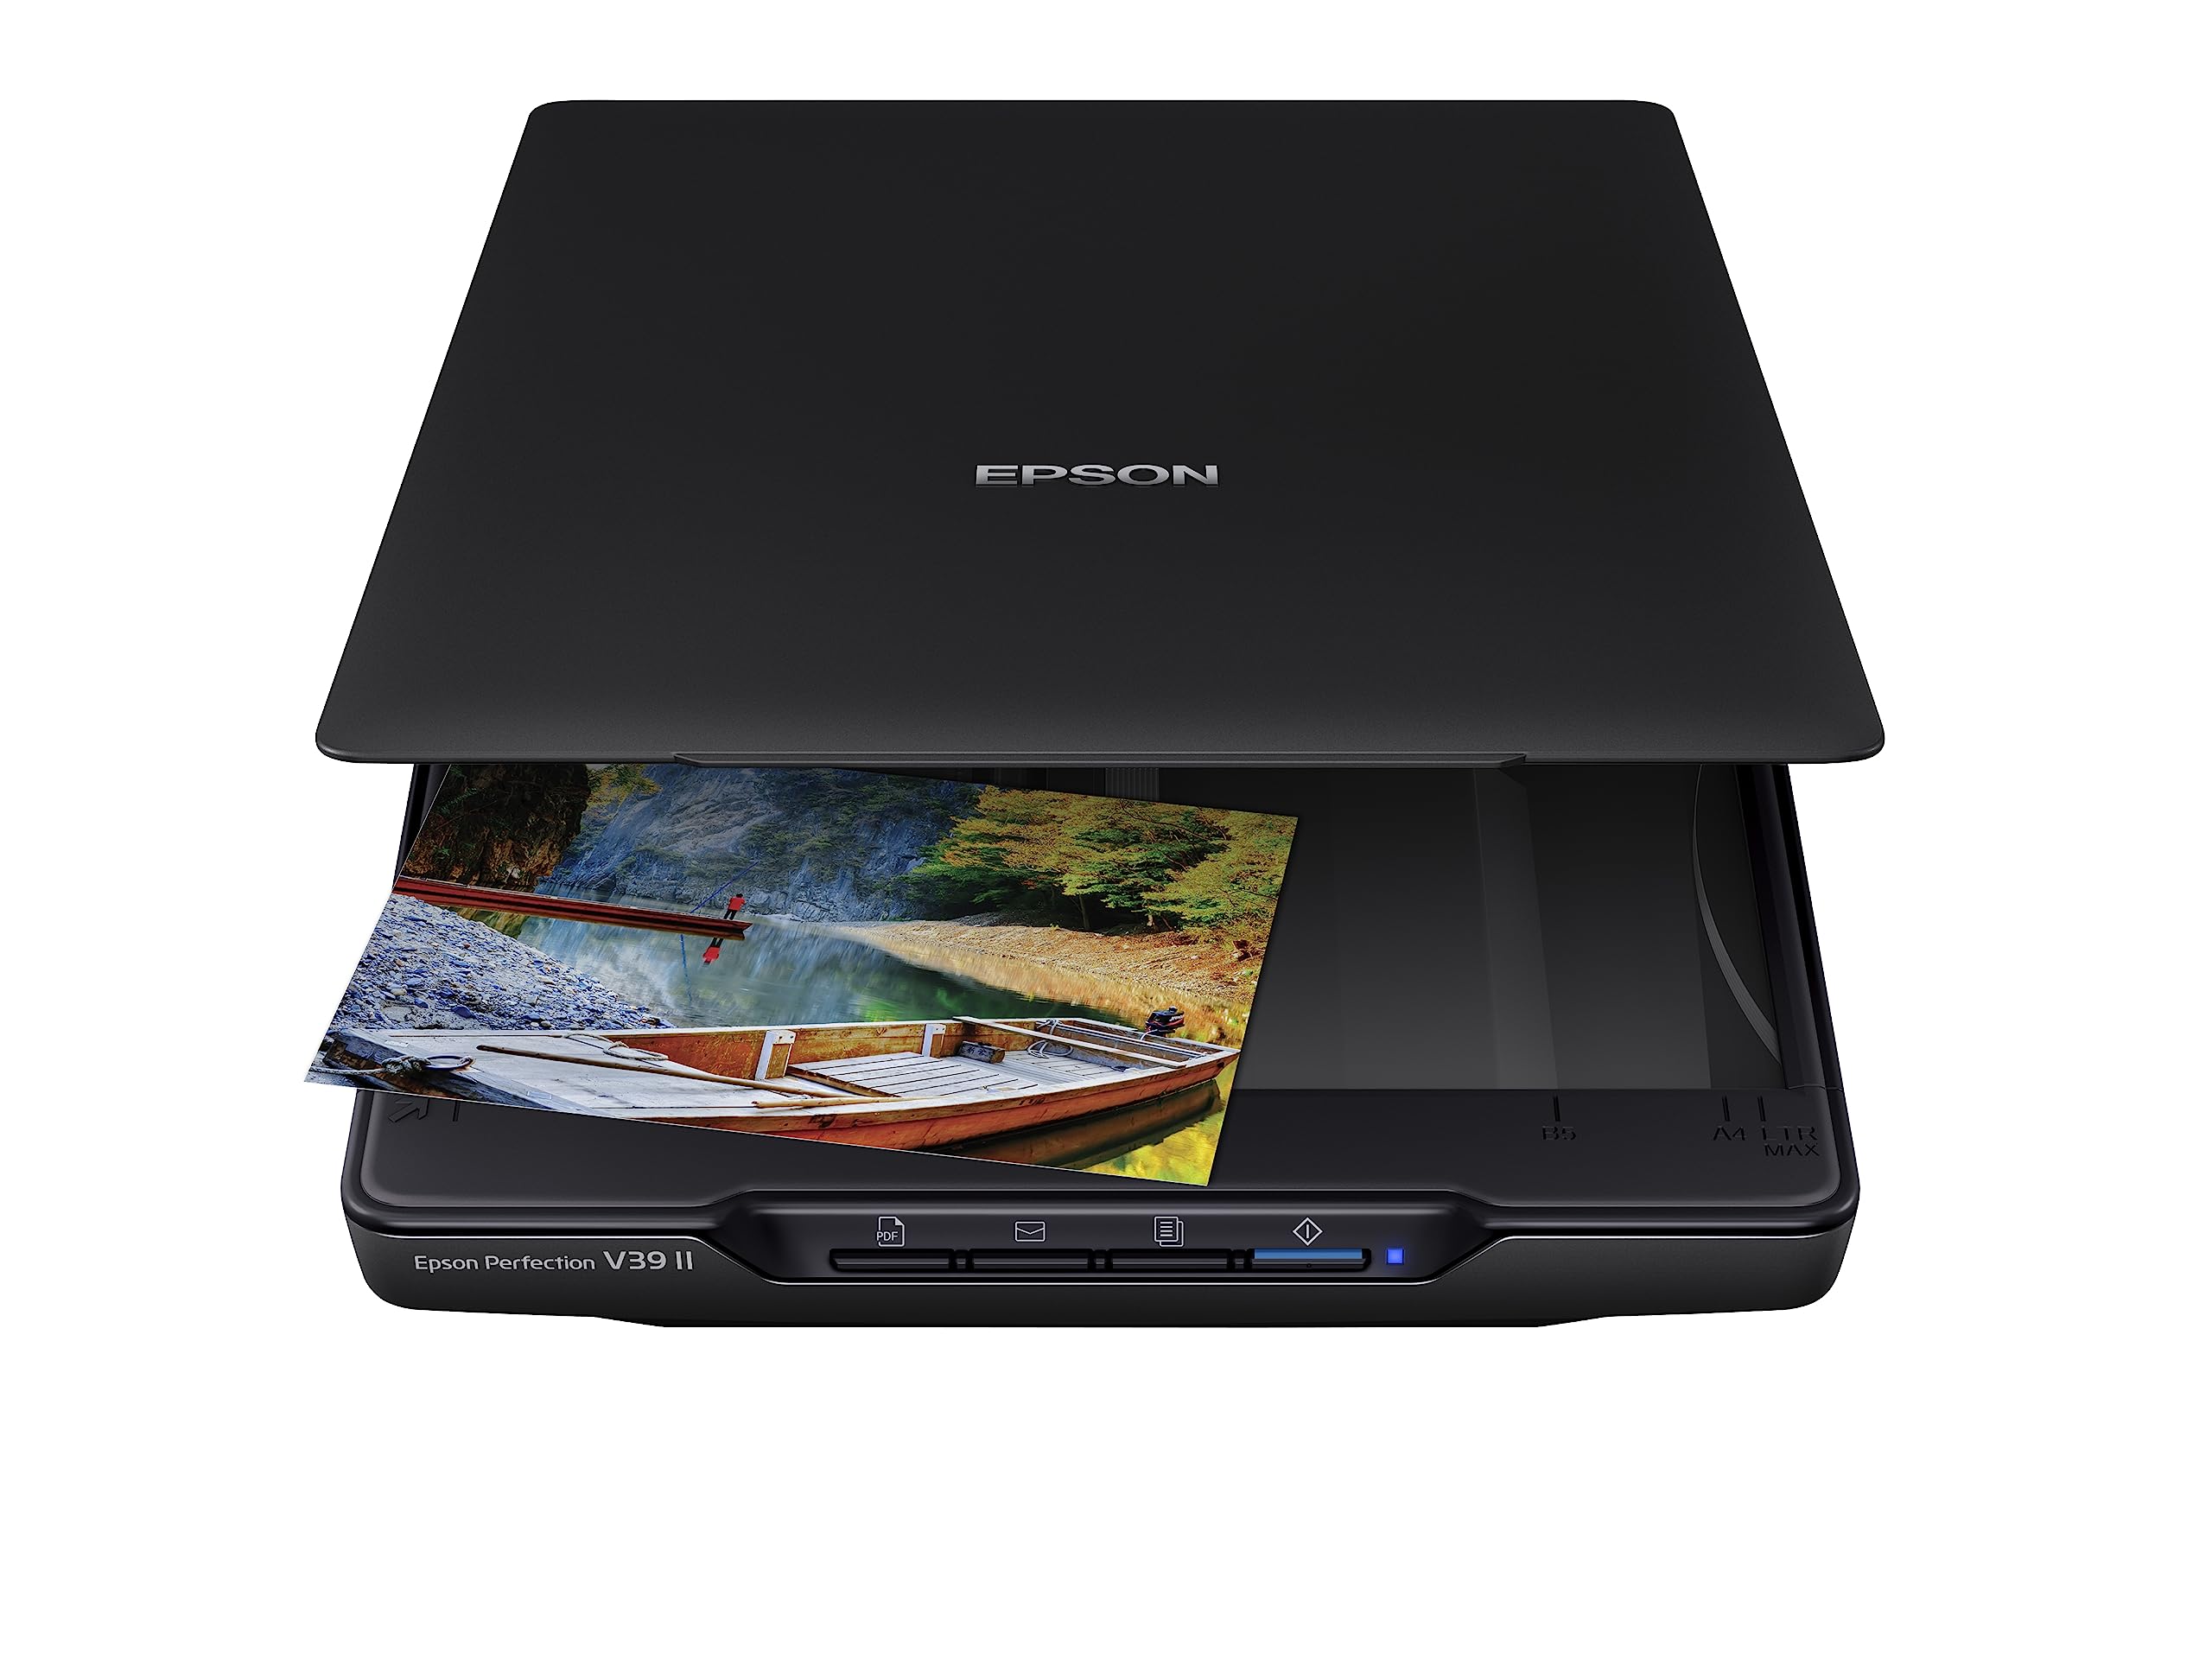 Epson Perfection V39 II Color Photo and Document Flatbed Scanner with 4800 dpi Optical Resolution, Scan to Cloud, USB Power and High-Rise, Removable Lid